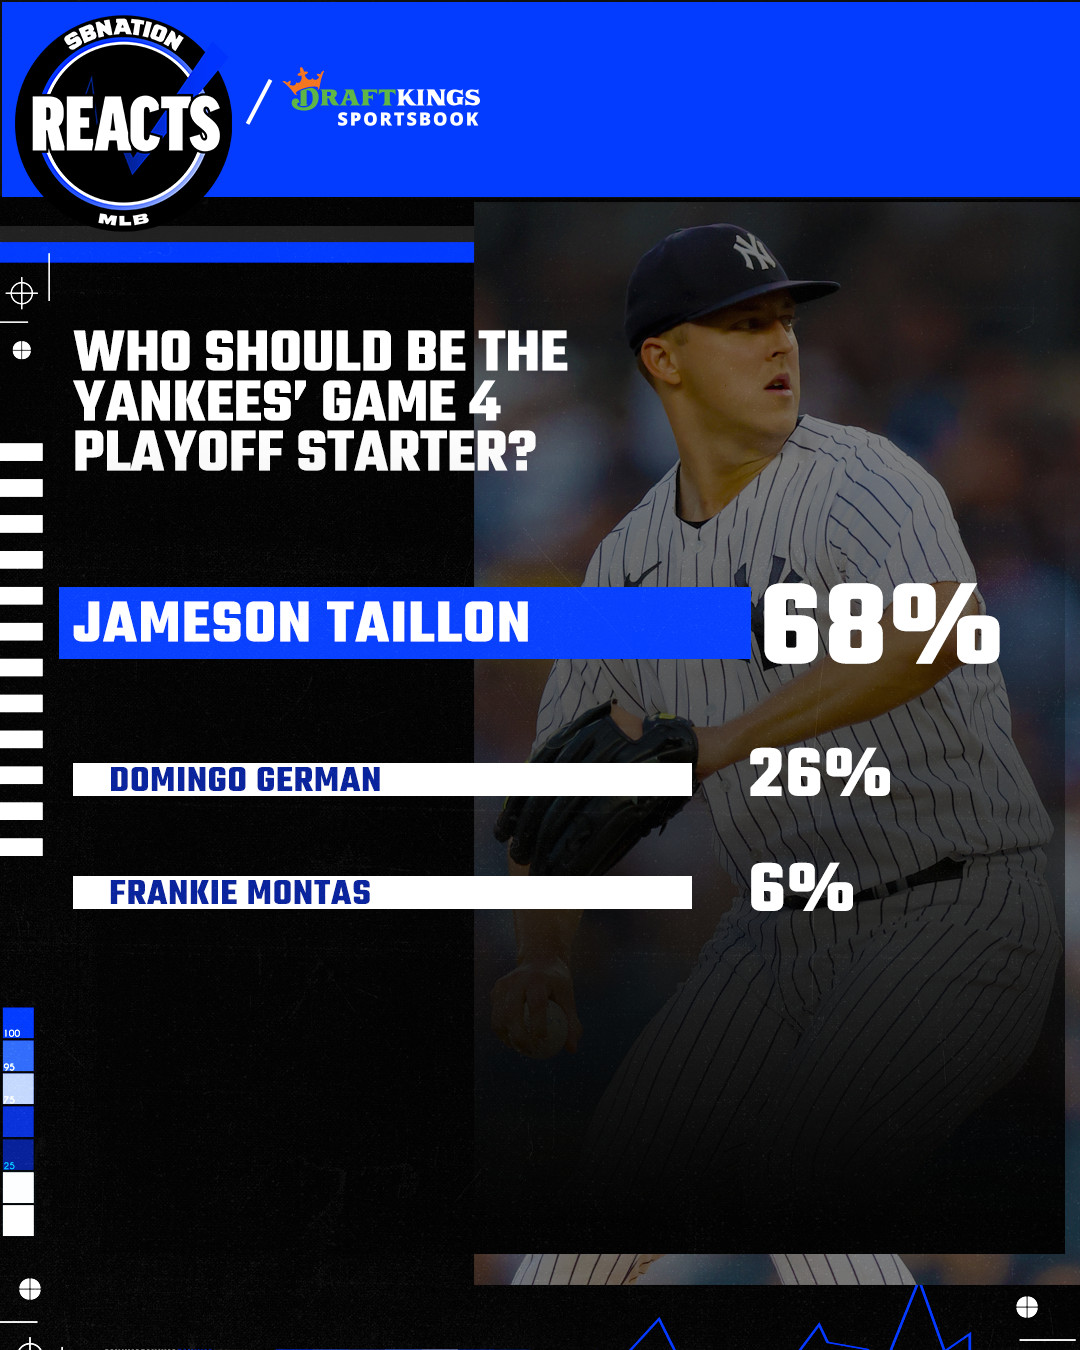 Yankees fans look to Jameson yankees baseball jersey history Taillon as  starter in playoff rotation